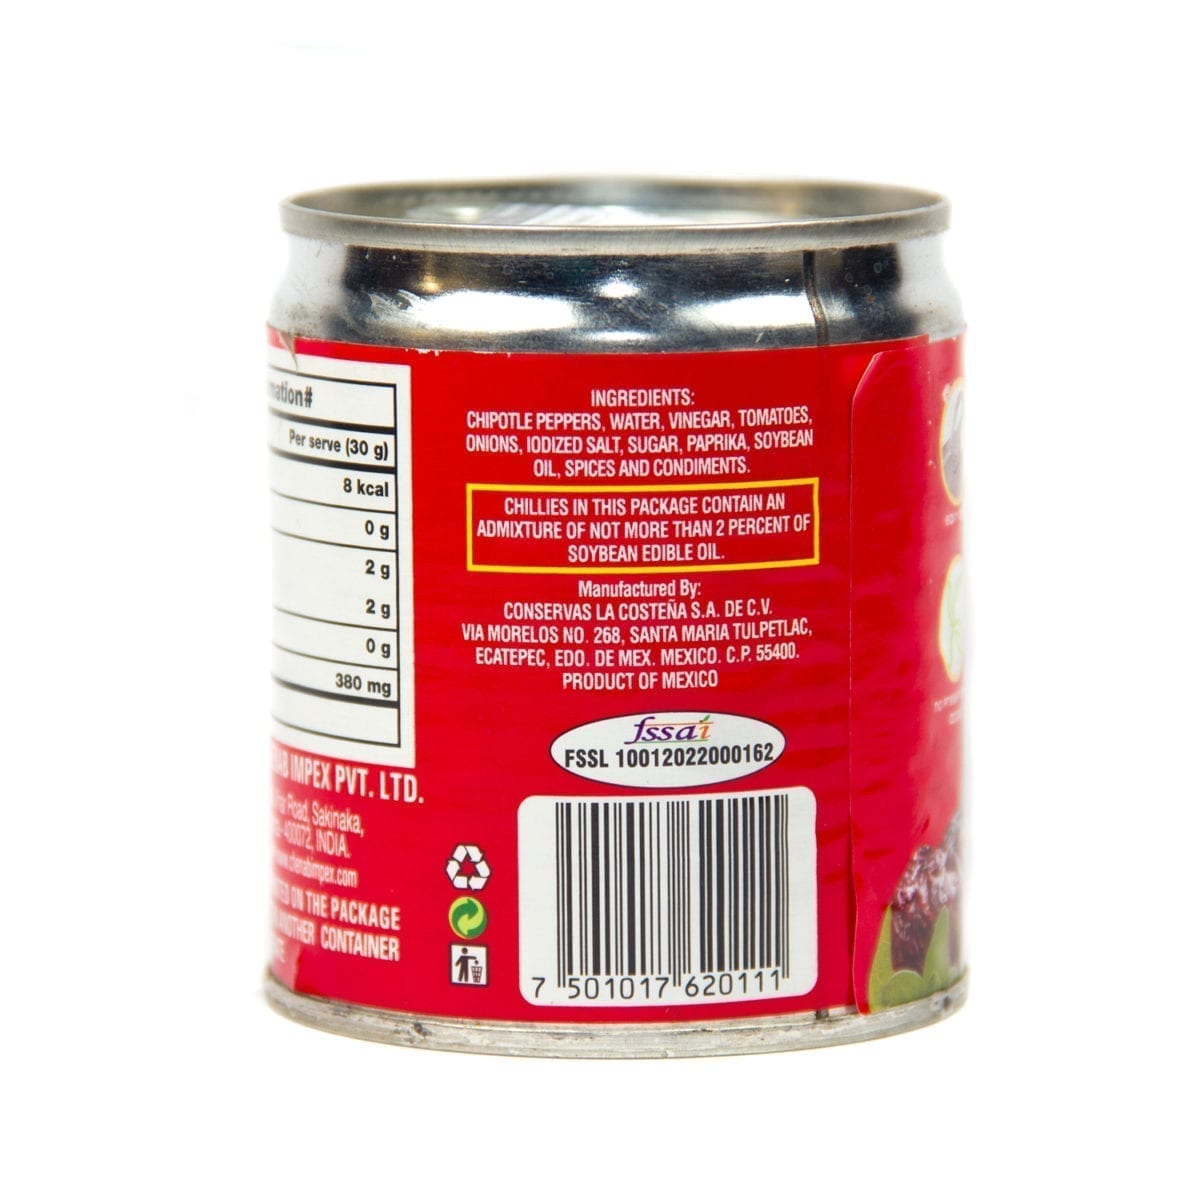 la-costena-chipotle-peppers-in-adobo-sauces-2.8kg-chenab-gourmet-food